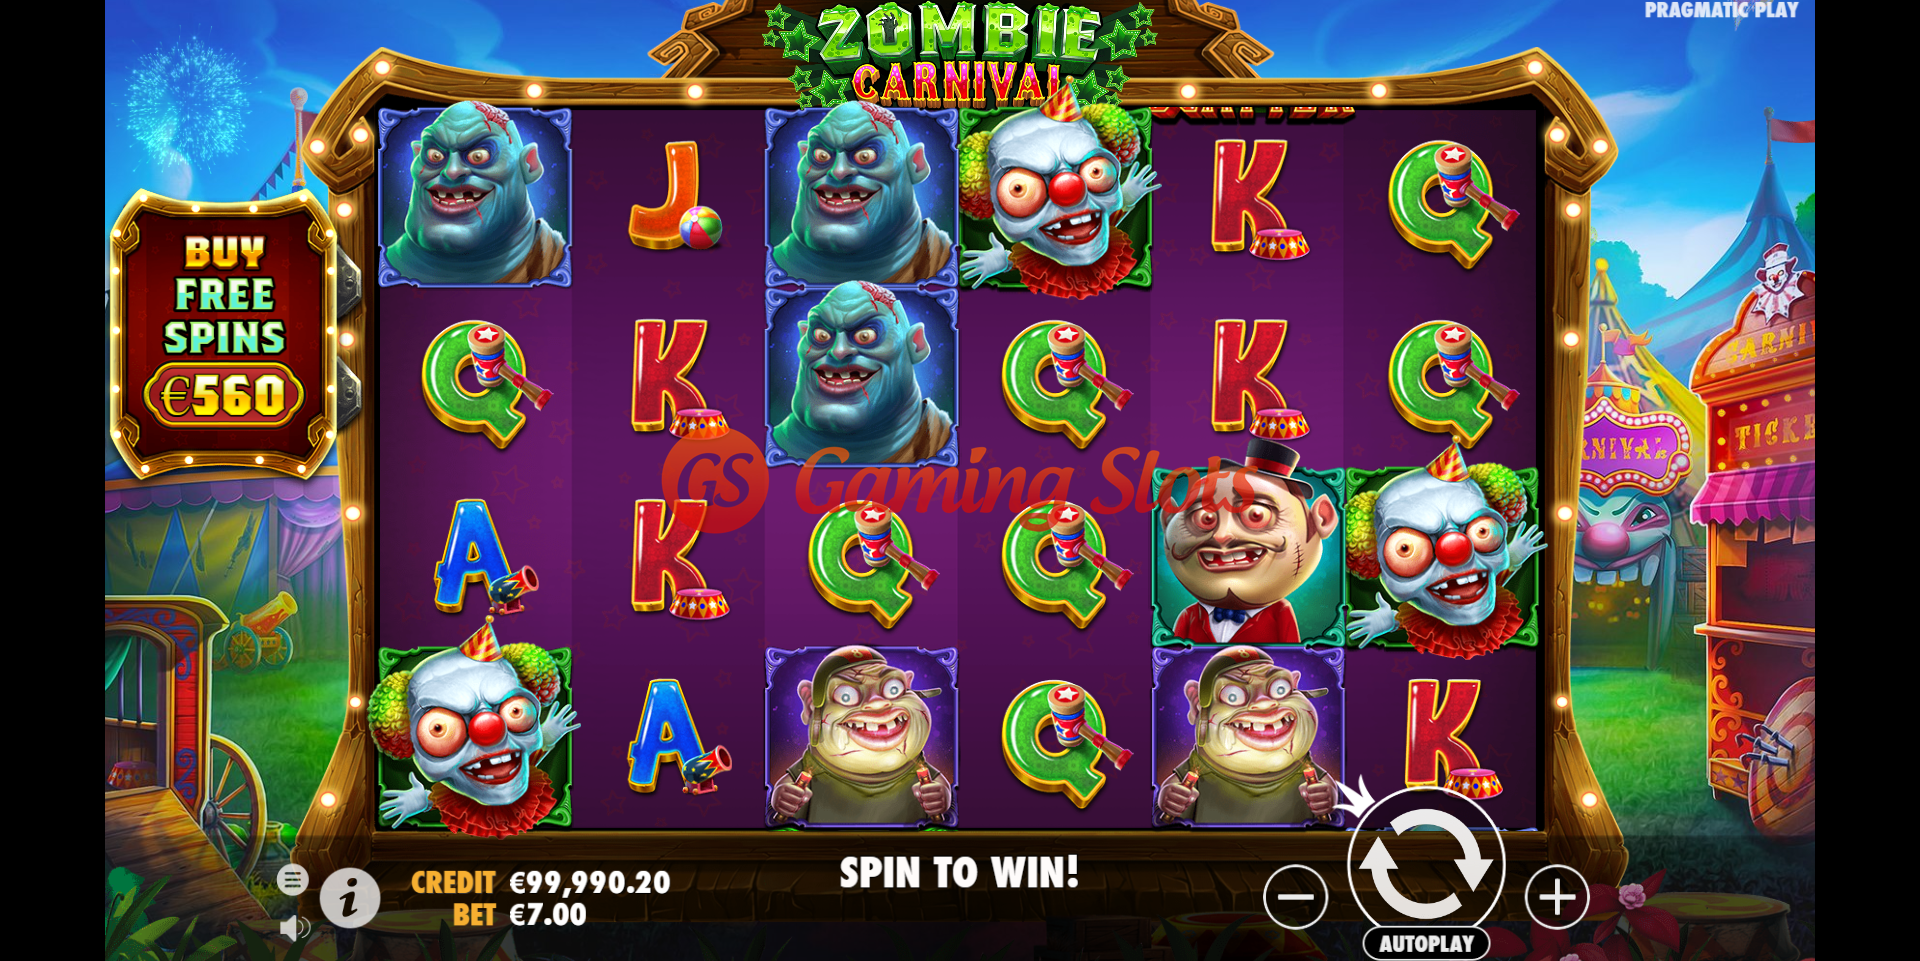 Base Game for Zombie Carnival slot from Pragmatic Play